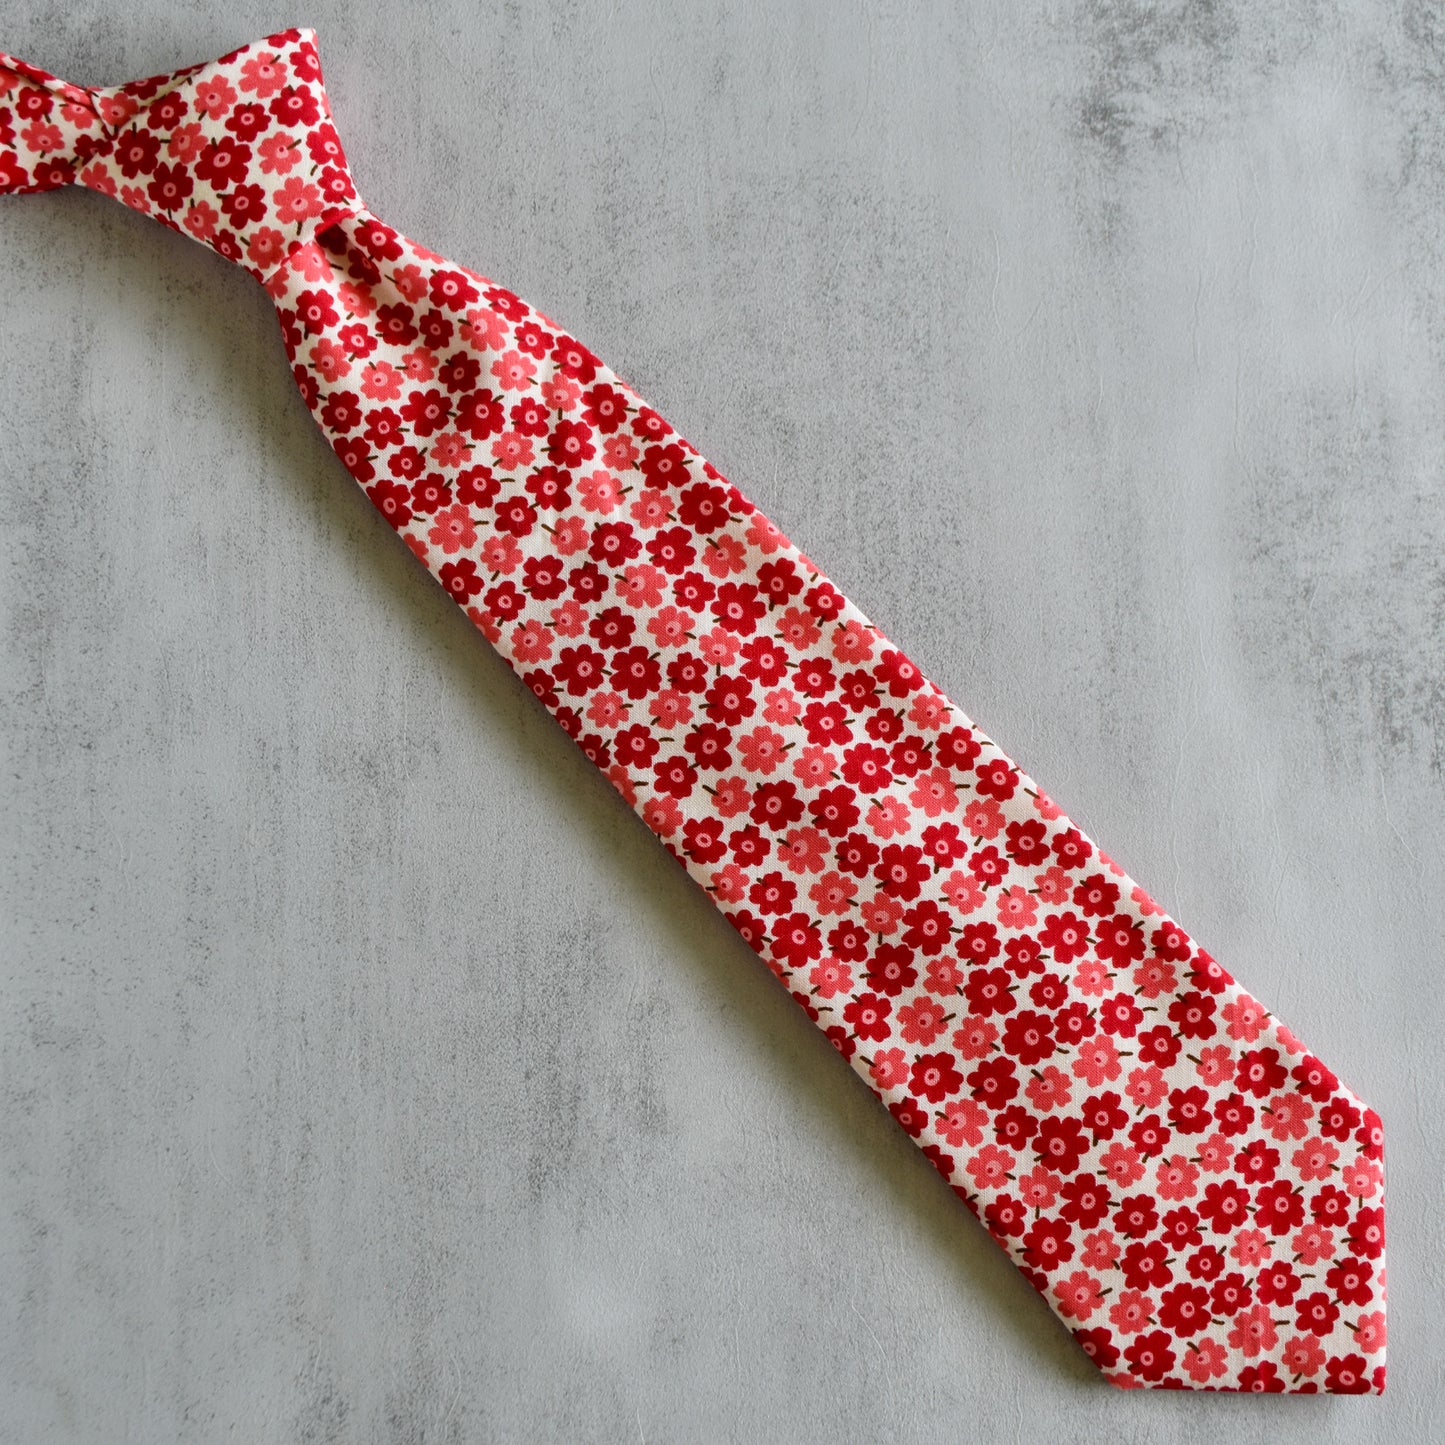 Candy Dipped Tie